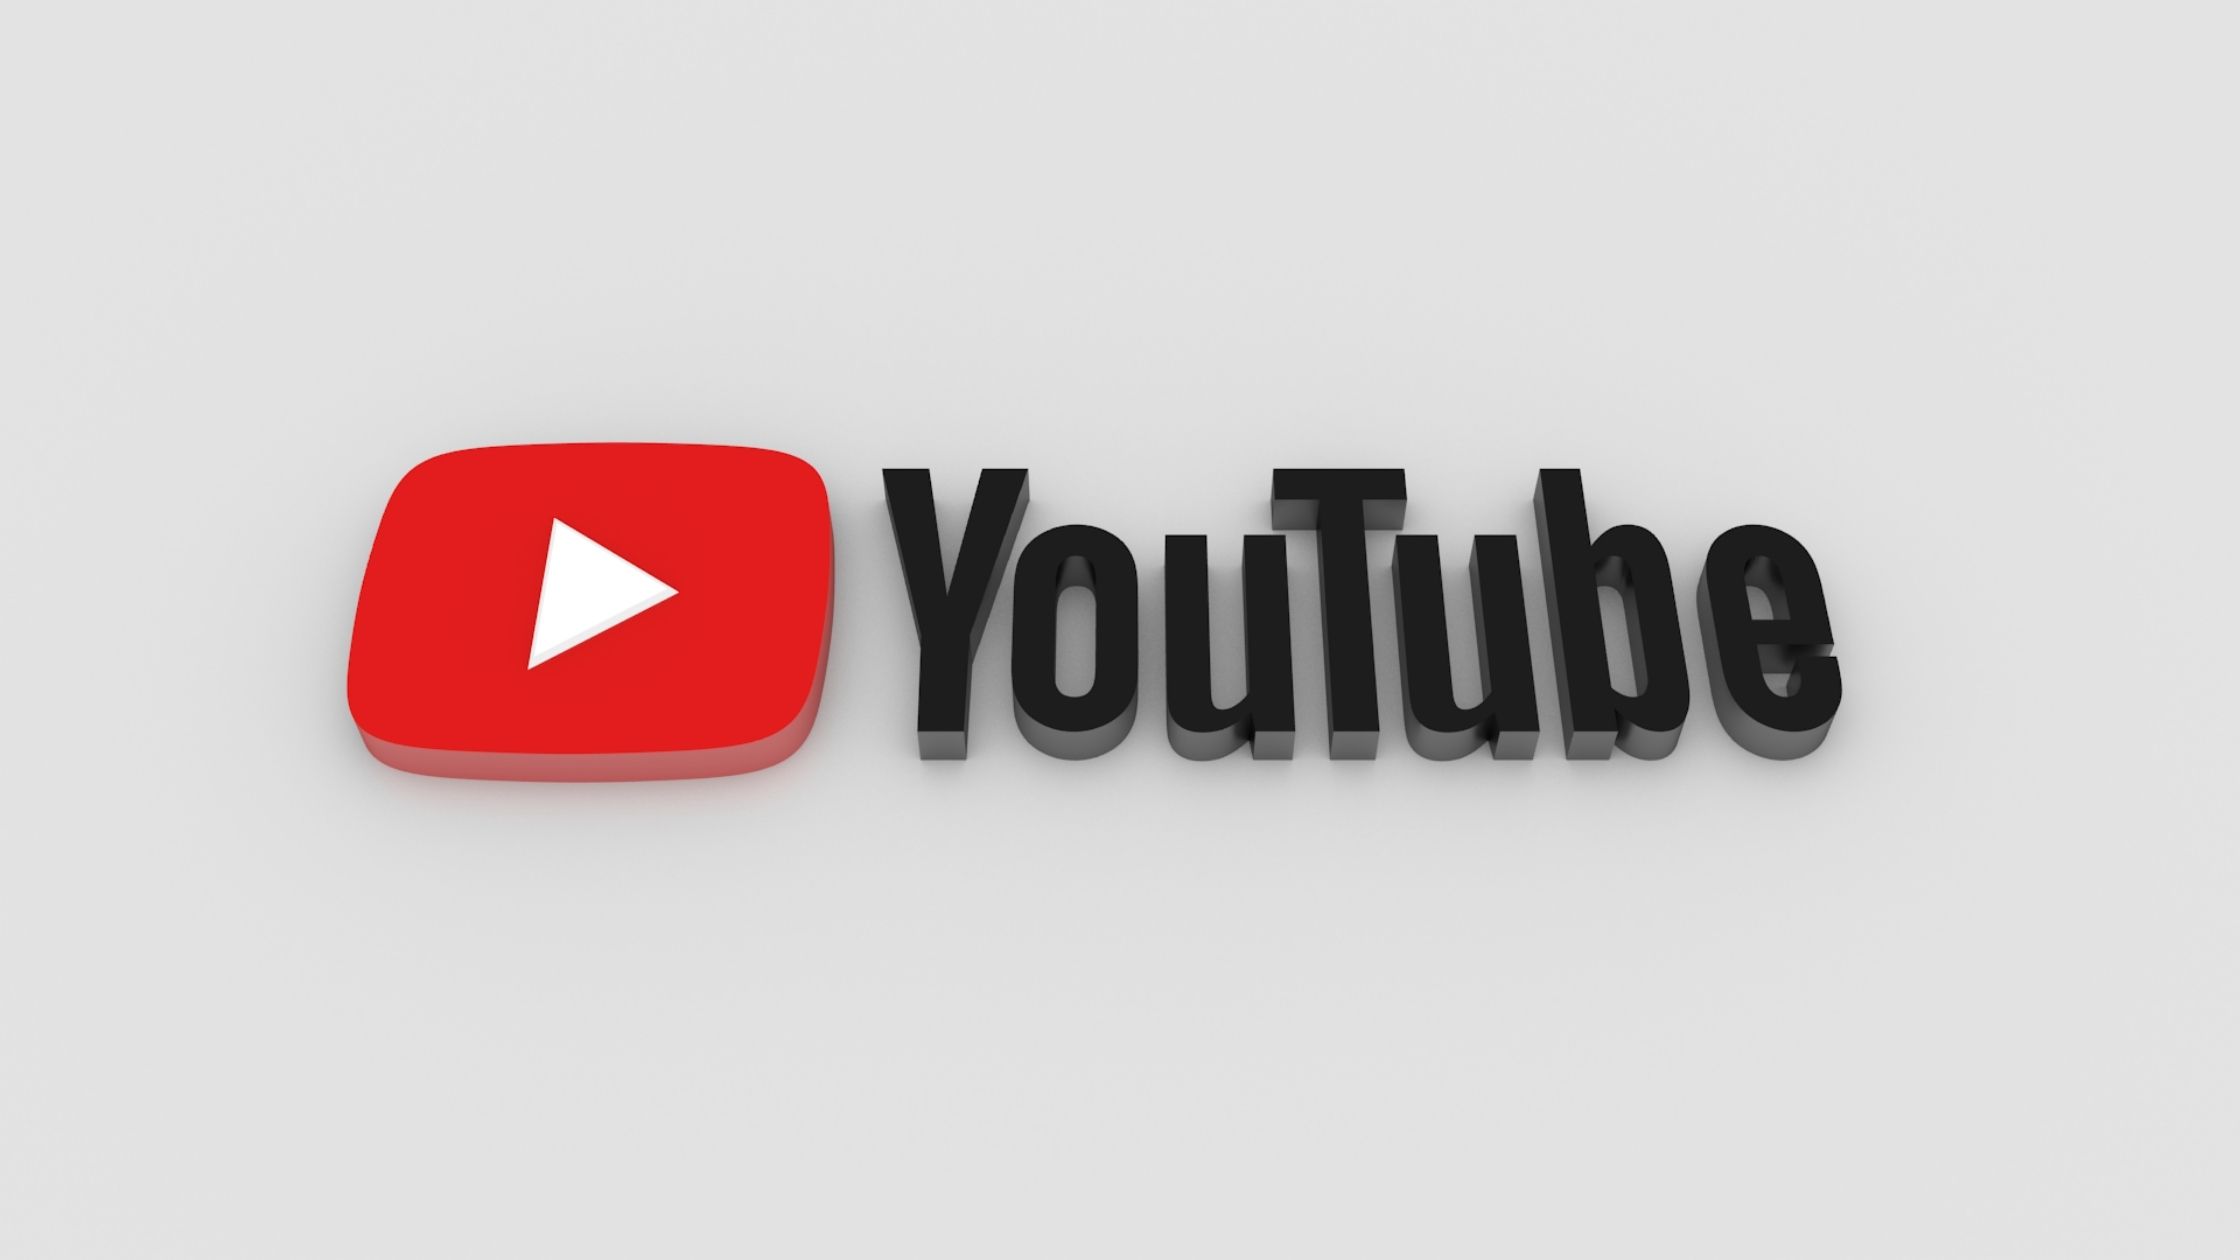 How to Change YouTube Views Counts from Lakhs to Millions?